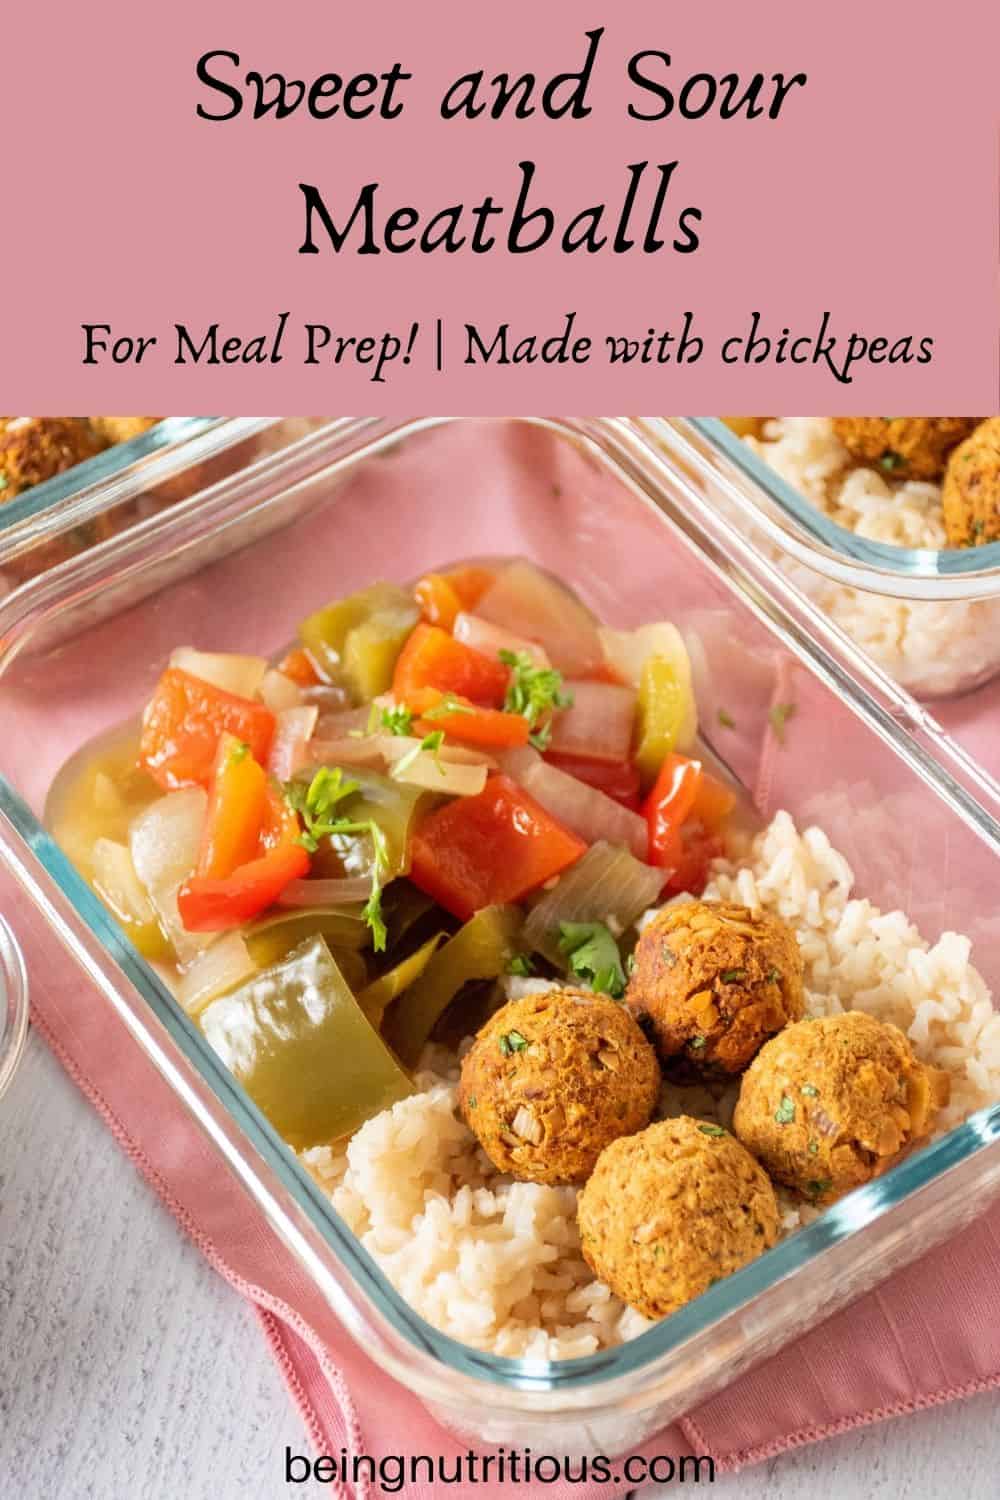 Glass meal prep container filled with rice, meatballs, and onions and bell peppers. Text overlay: Sweet and Sour Meatballs; for meal prep! Made with chickpeas.